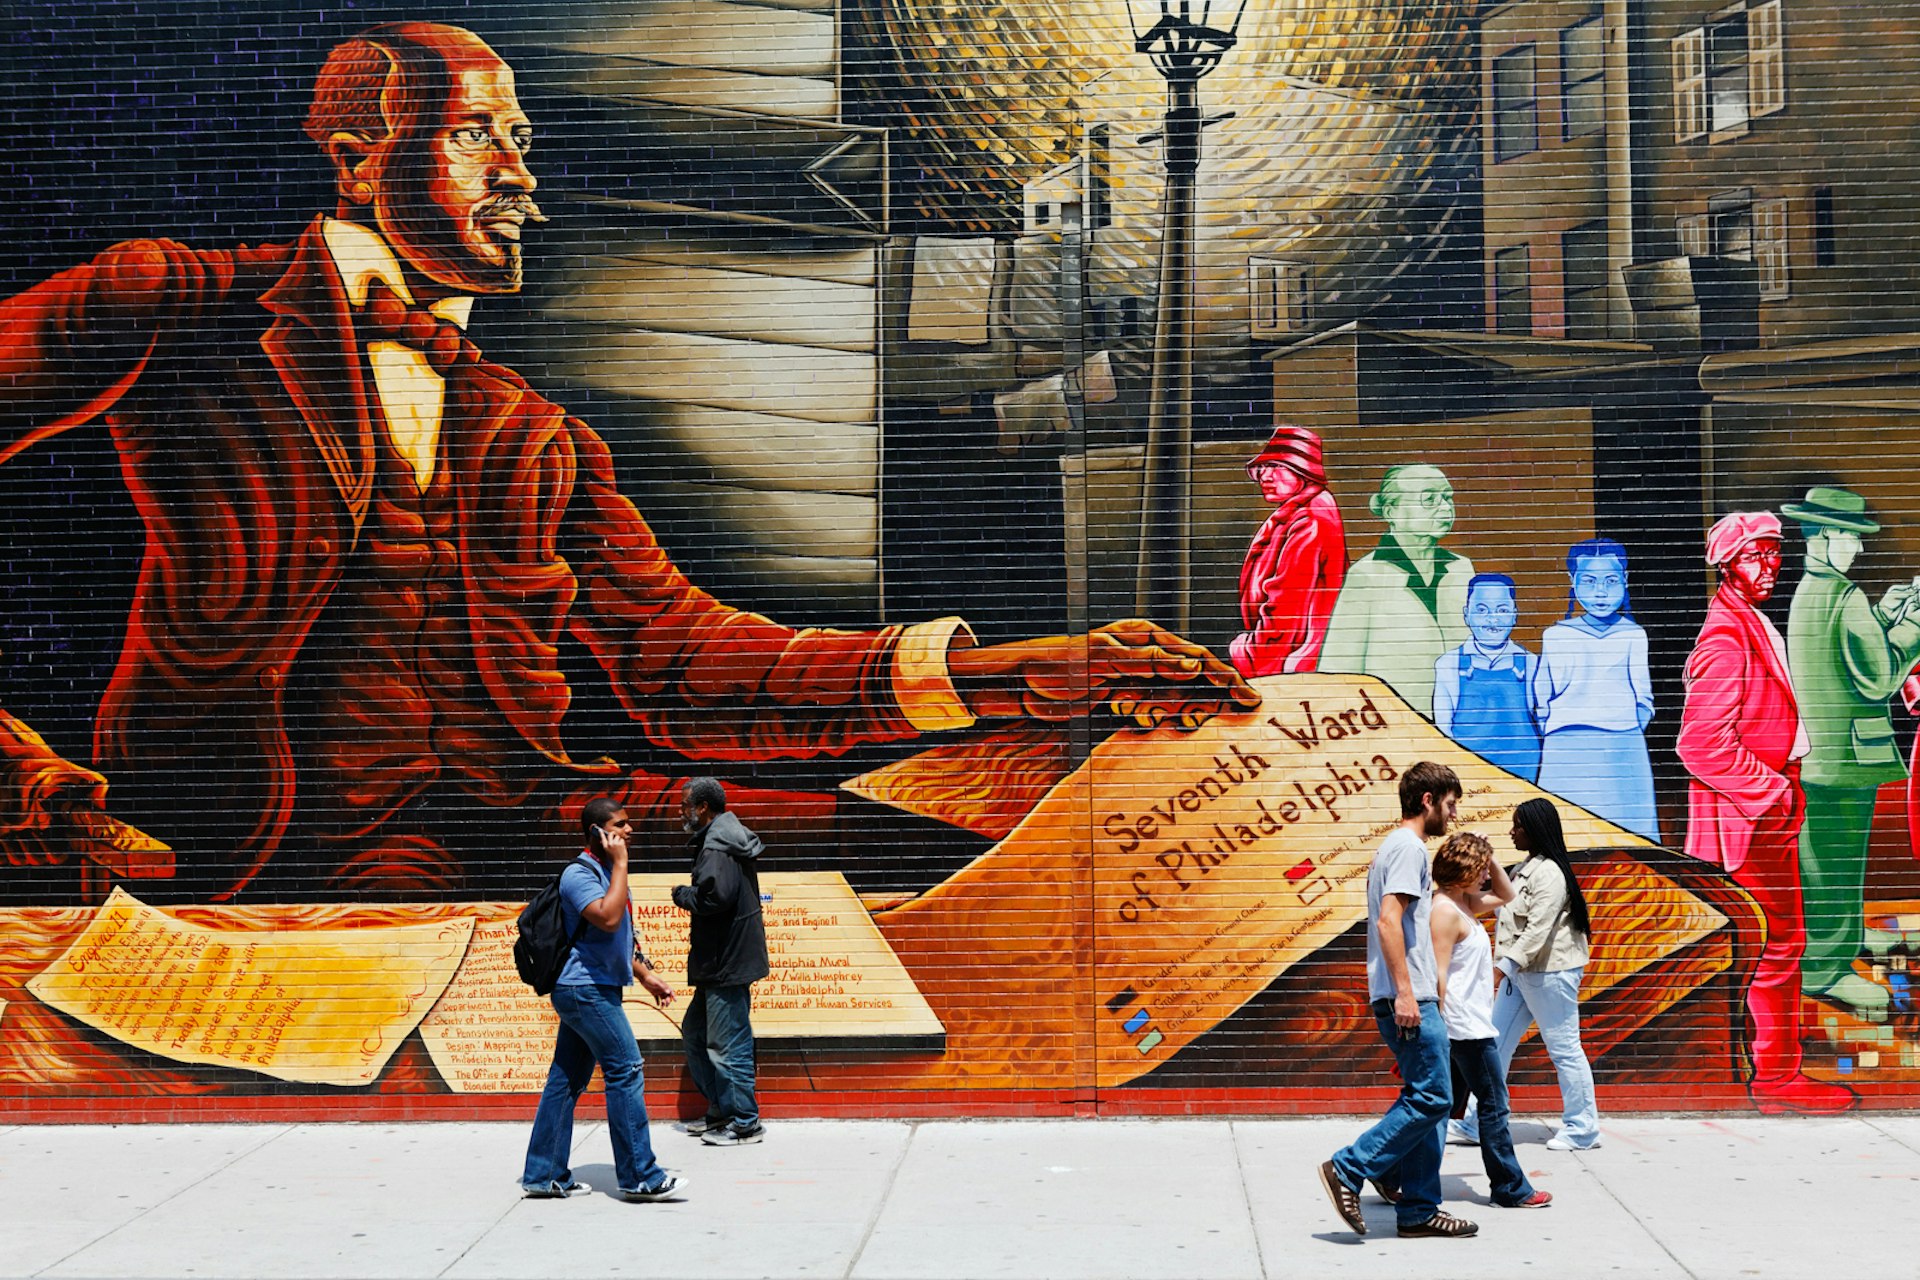 A colourful wall mural depicting W.E.B Du Bois, with people on the sidewalk nearby. The painting shows an oversized man at a desk littered in papers, with smaller people painted in red, green and blue to the right of him standing on a street under a light. 